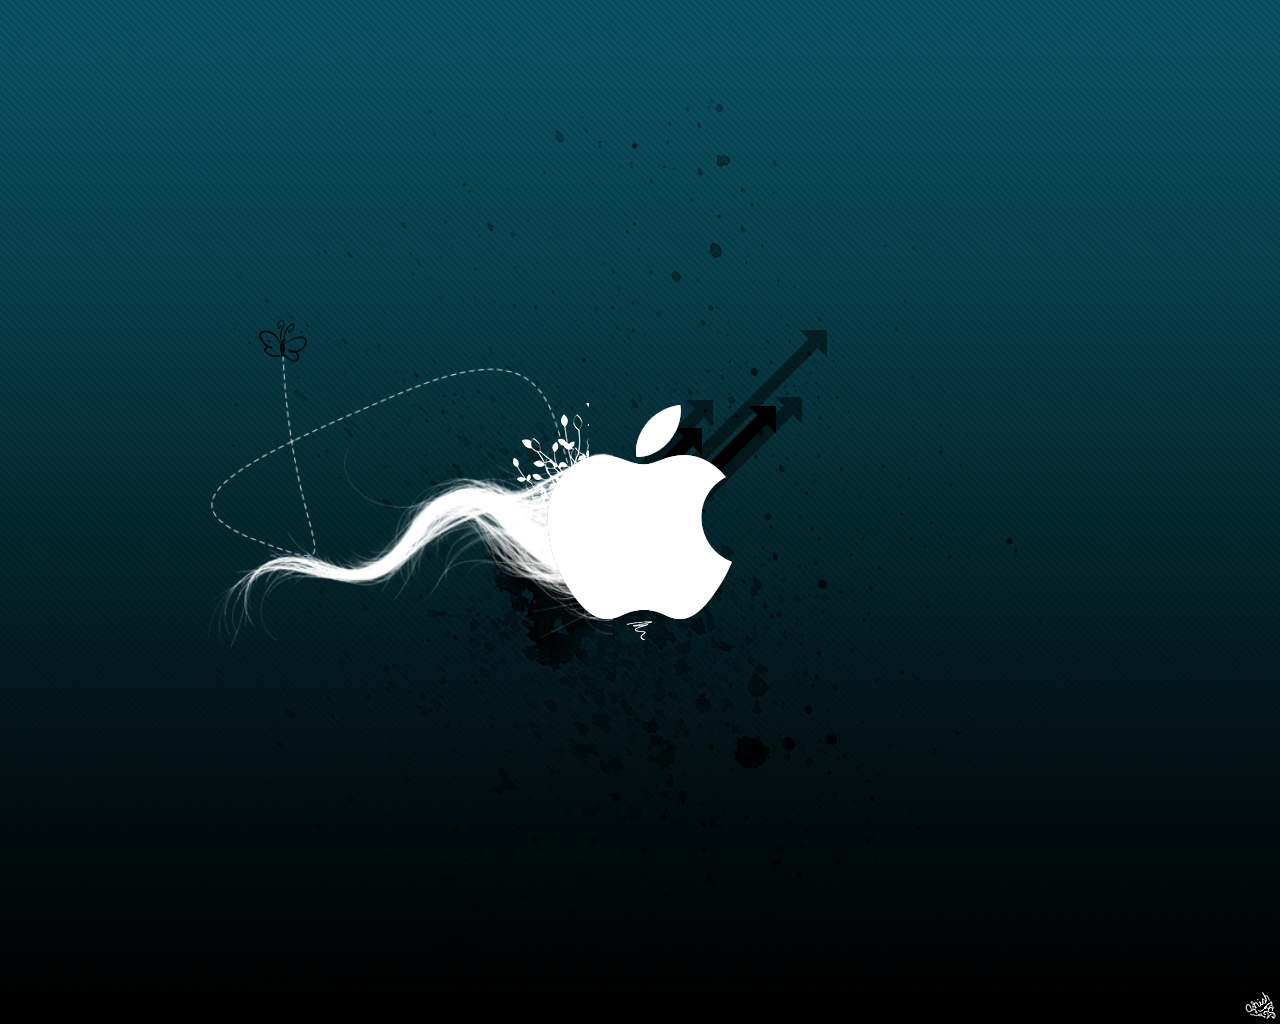  so get free download cool apple wallpapers and make your desktop cool